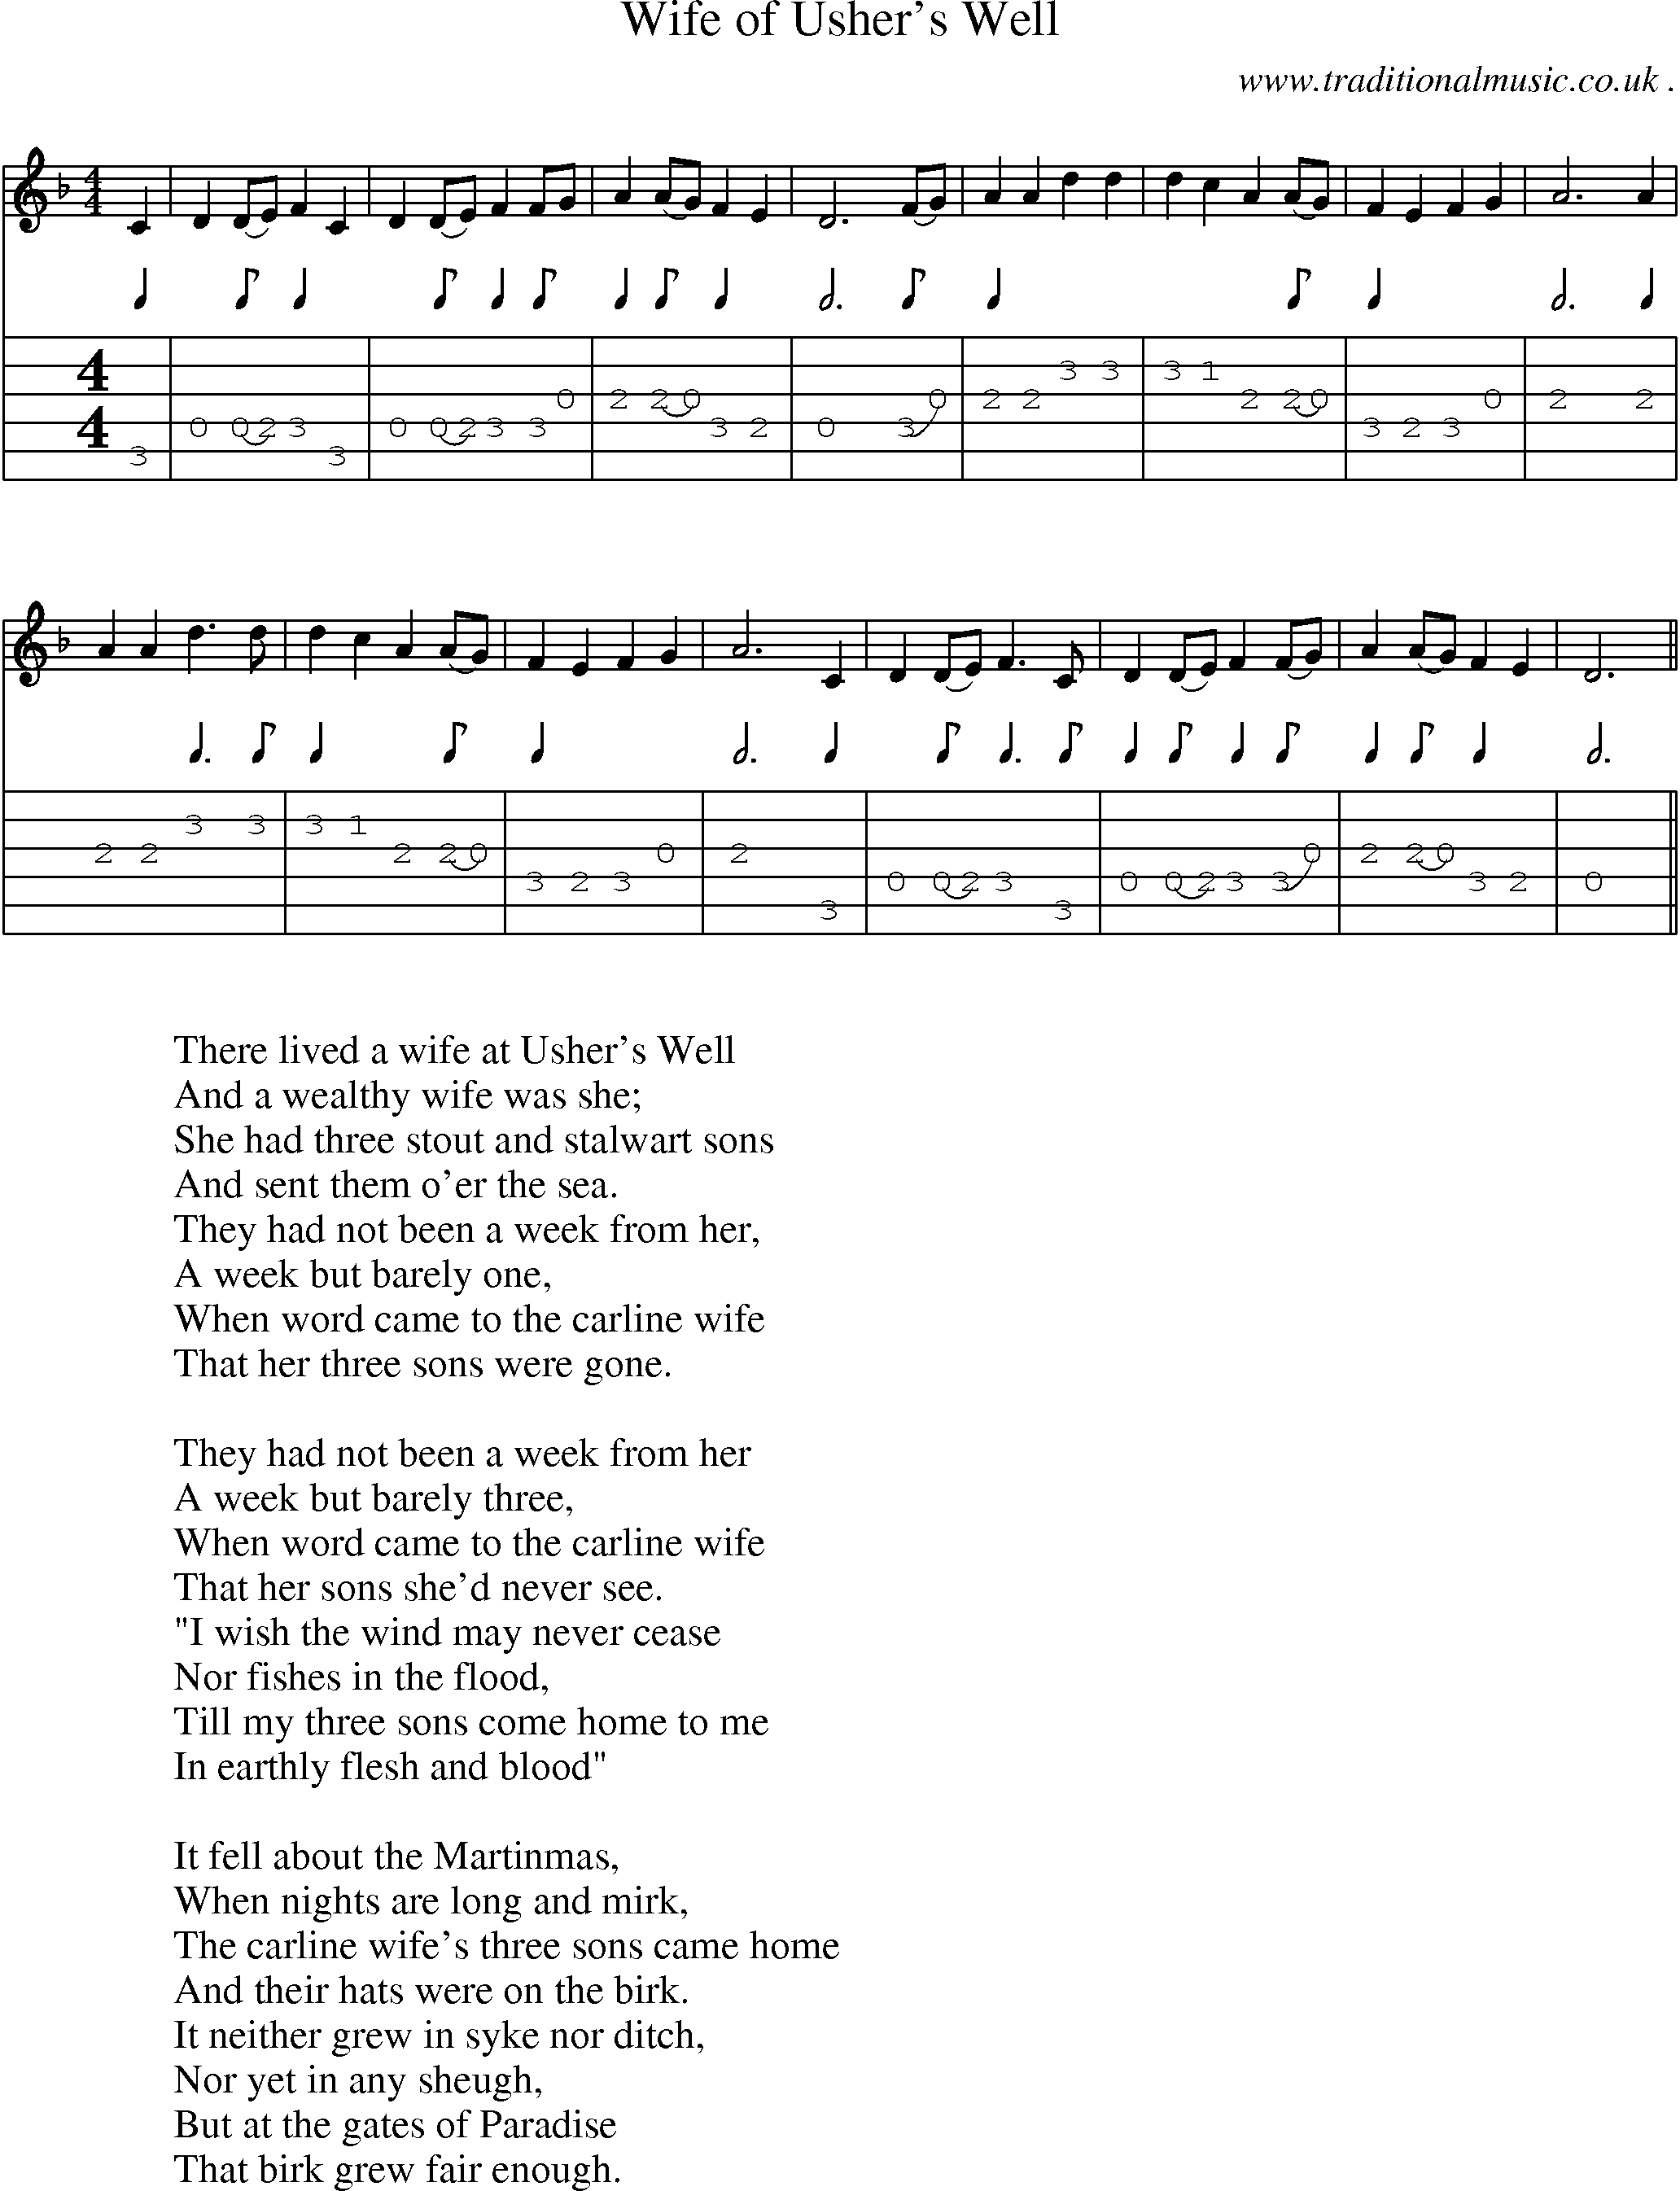 Sheet-Music and Guitar Tabs for Wife Of Ushers Well